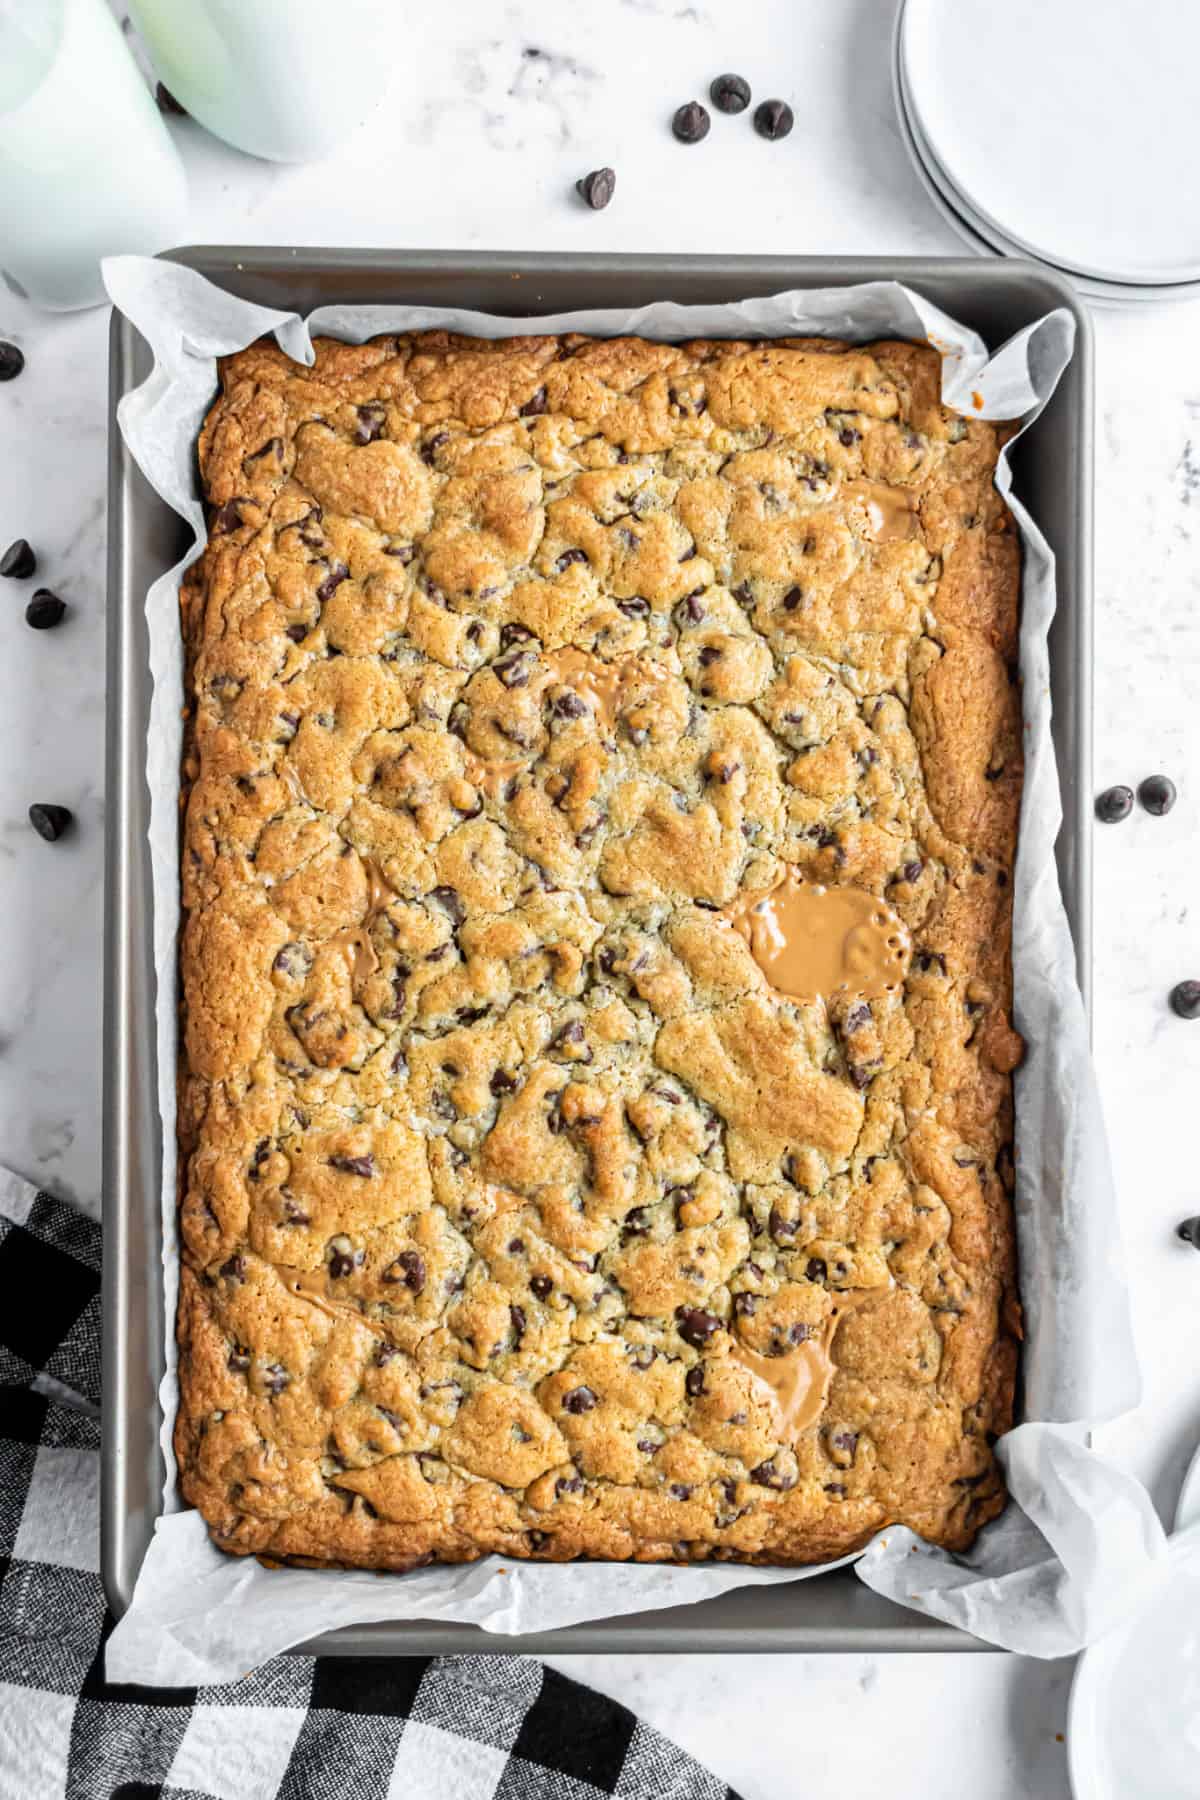 Baked peanut butter swirled chocolate chip cookie bars in a parchment paper lined 13x9 baking dish.